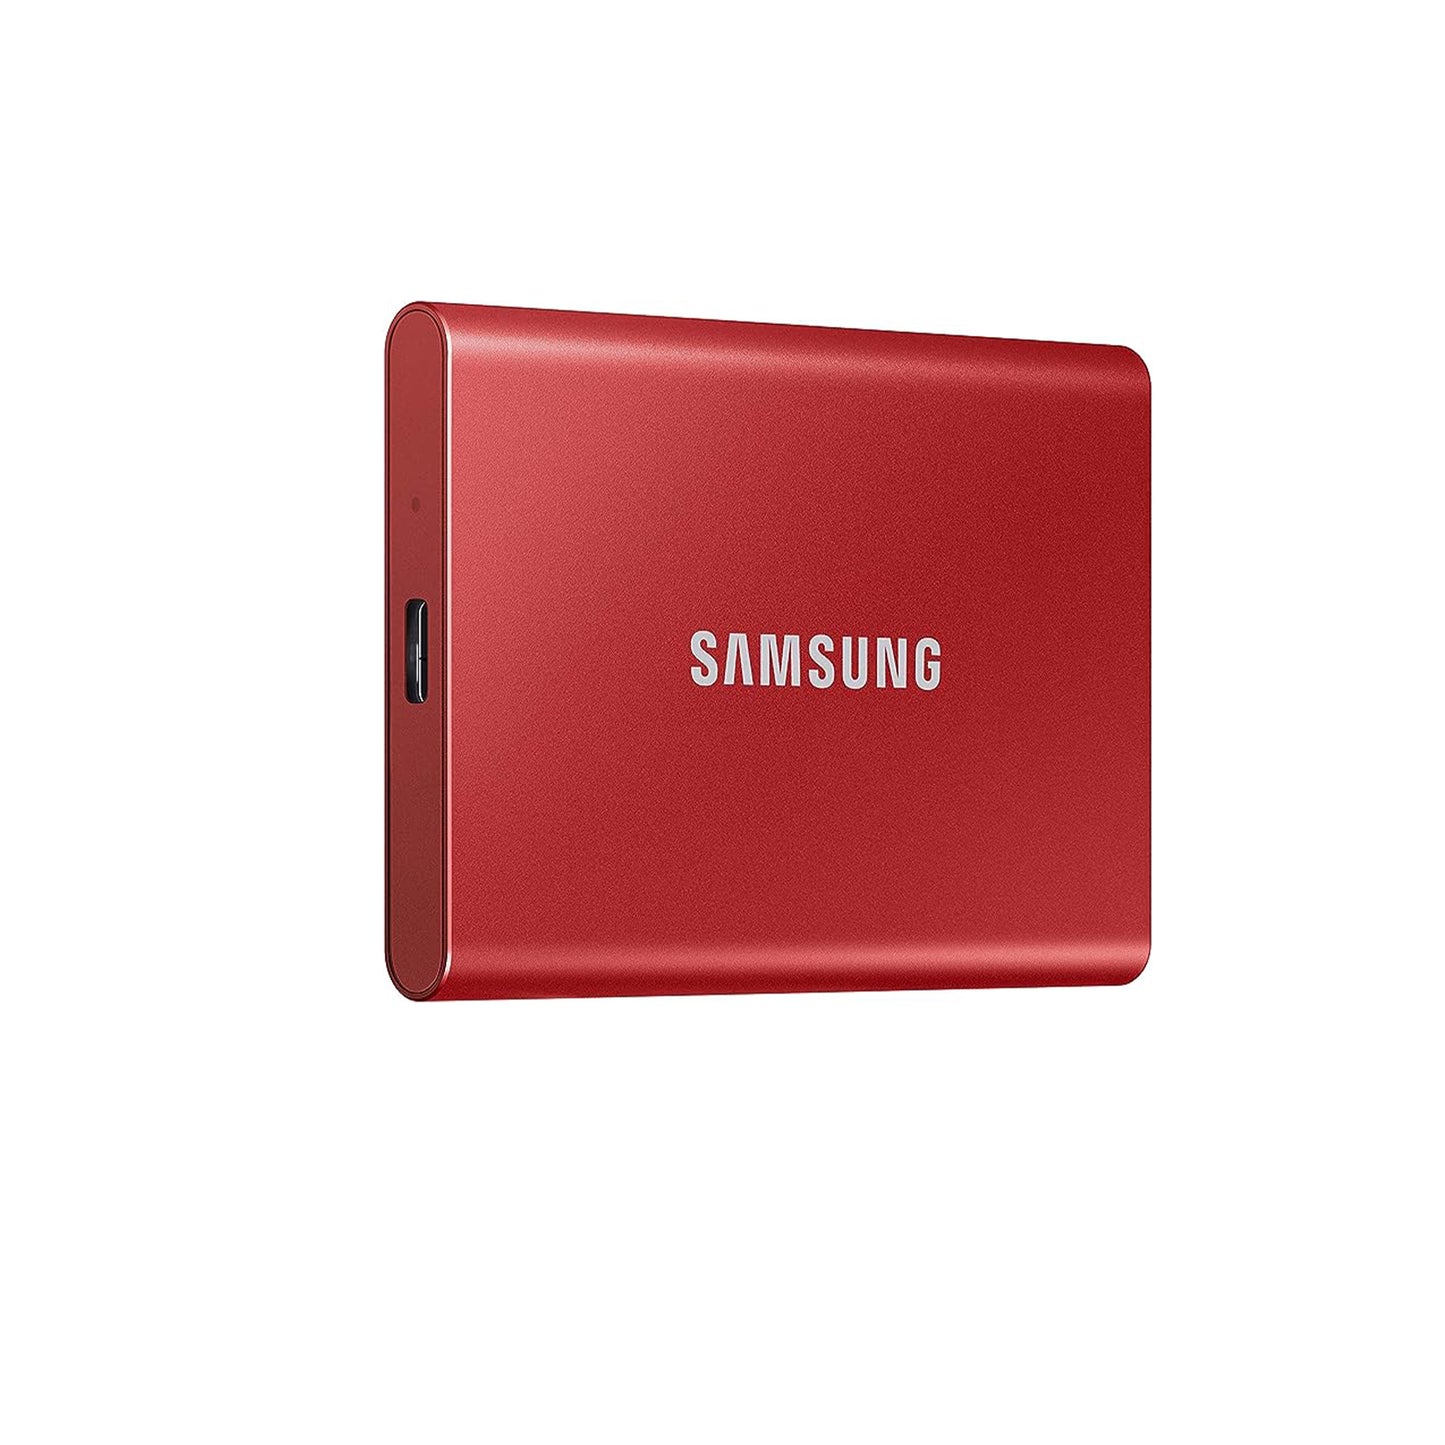 SAMSUNG SSD T7 Portable External Solid State Drive 2TB, USB 3.2 Gen 2, Reliable Storage for Gaming, Students, Professionals, MU-PC2T0R/AM, Red